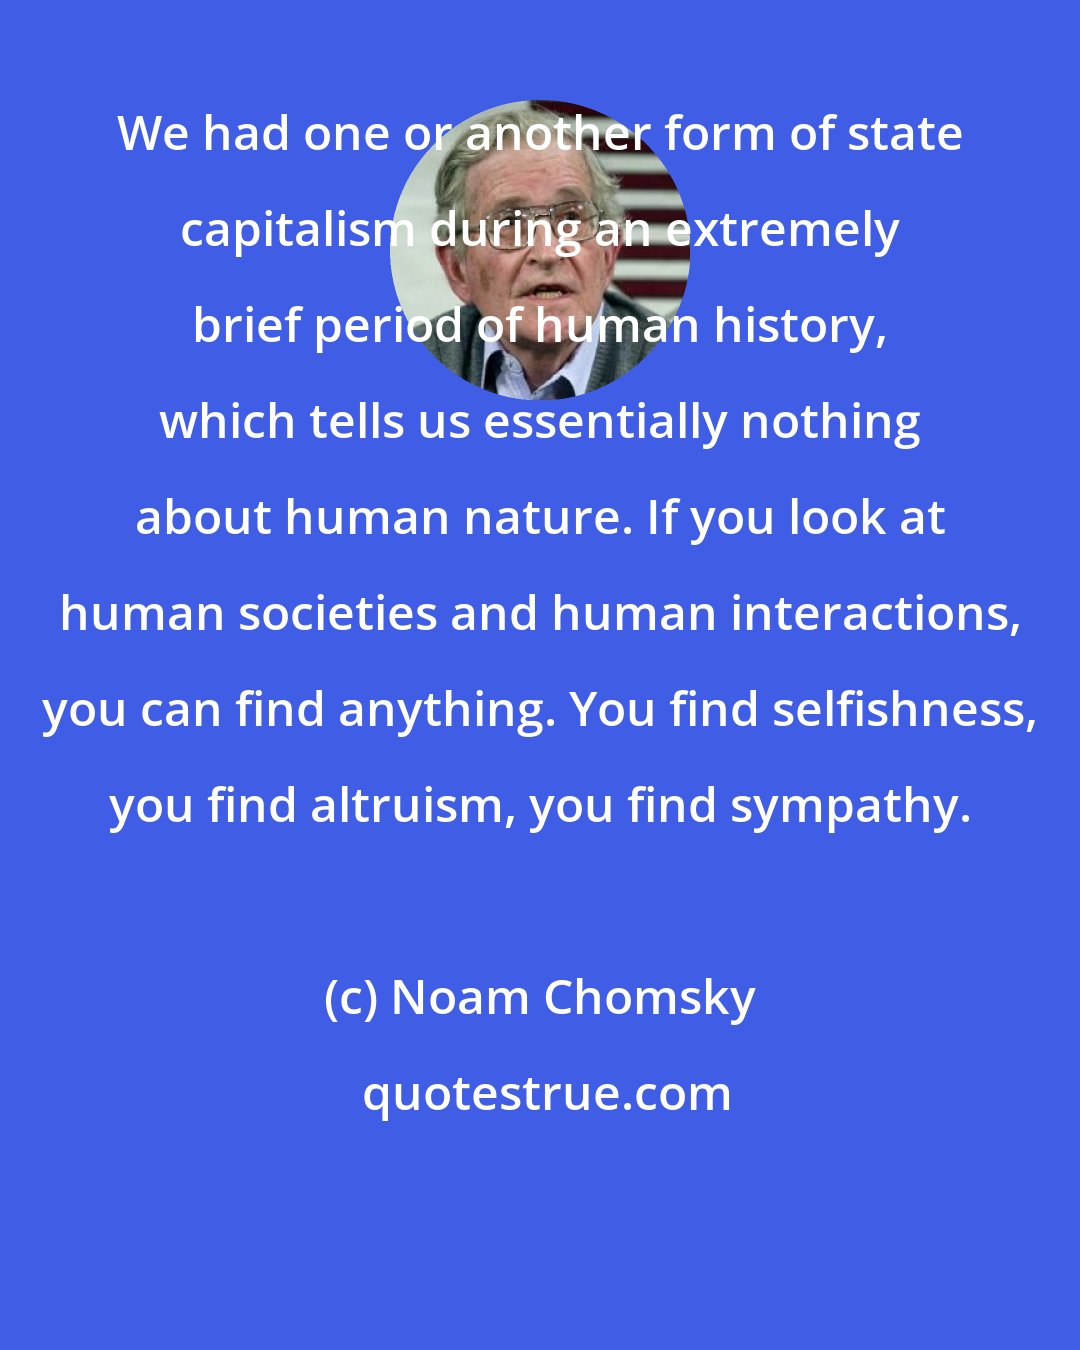 Noam Chomsky: We had one or another form of state capitalism during an extremely brief period of human history, which tells us essentially nothing about human nature. If you look at human societies and human interactions, you can find anything. You find selfishness, you find altruism, you find sympathy.